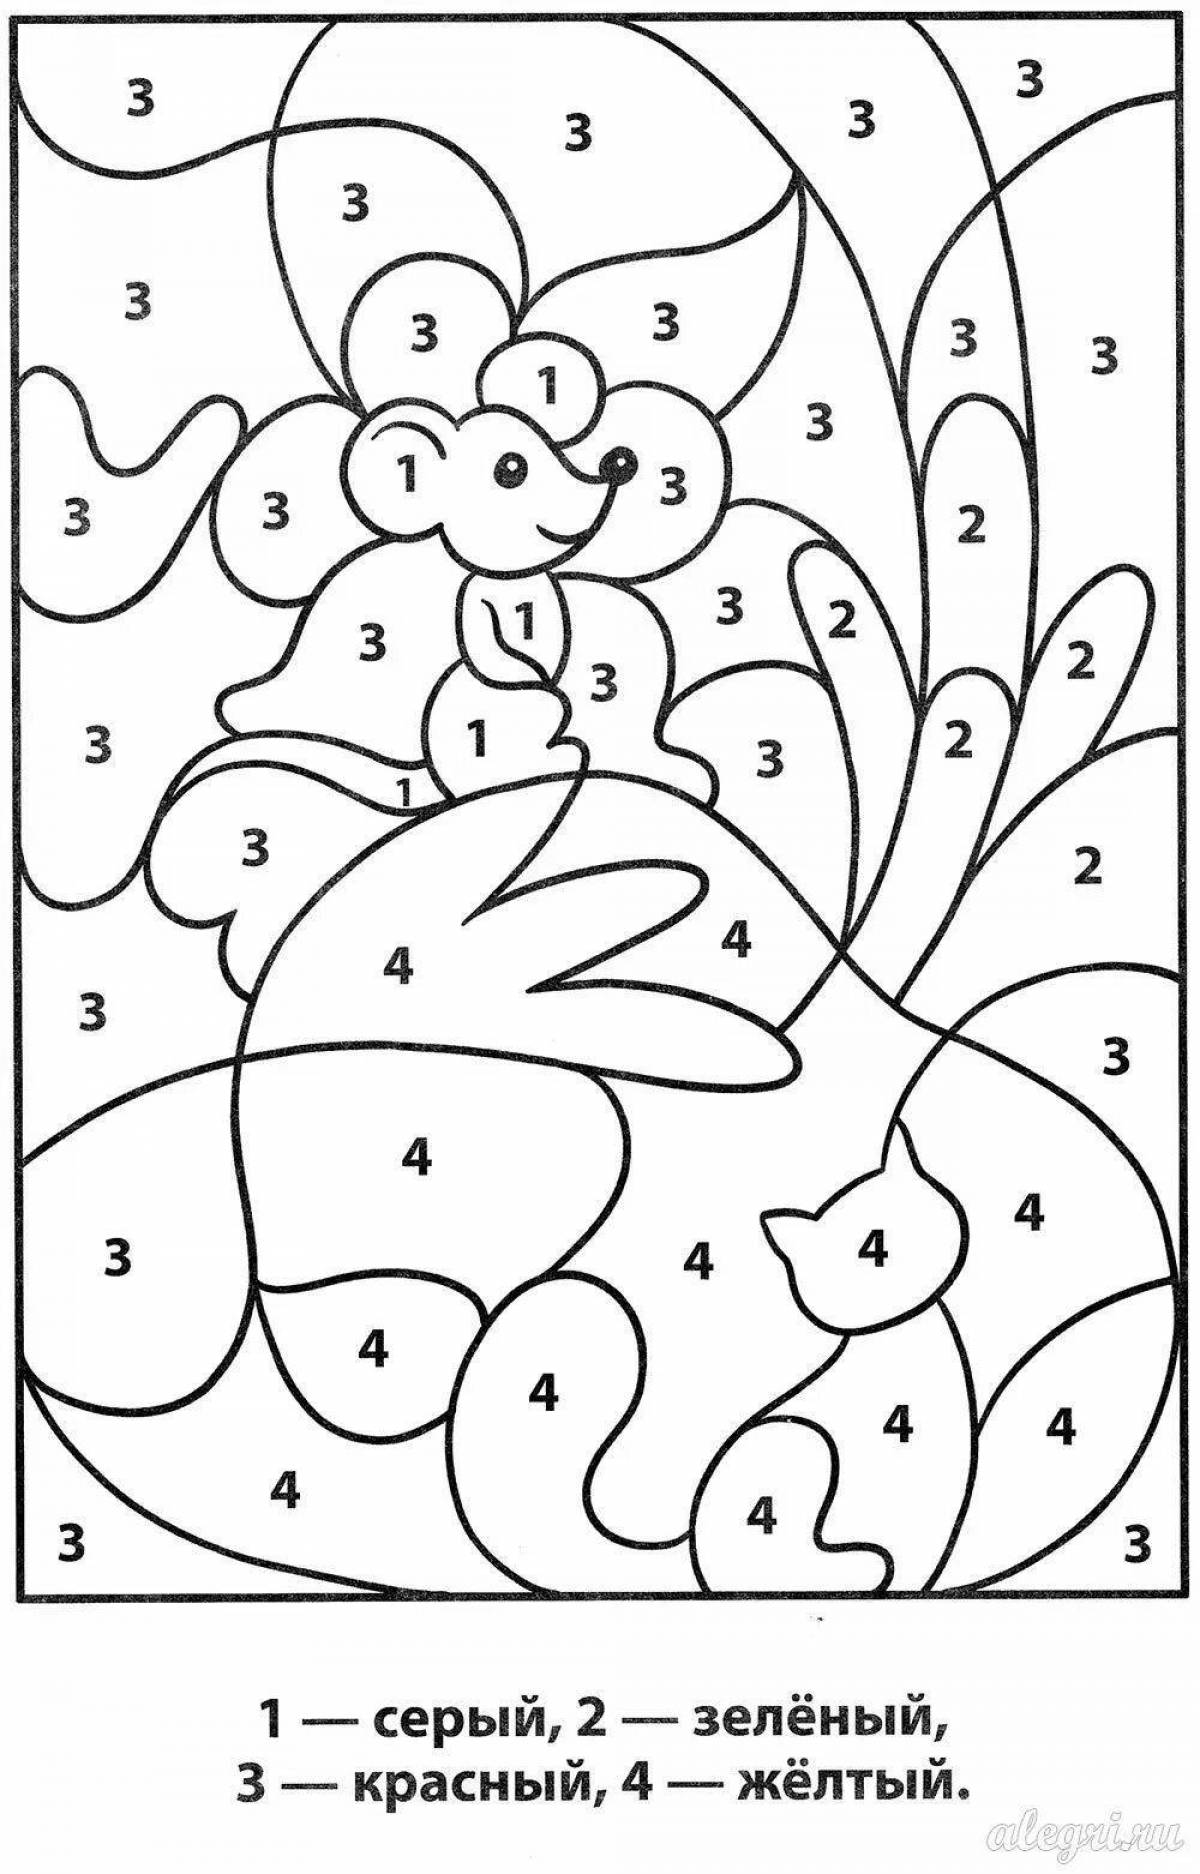 Creative coloring by numbers up to 5 for preschoolers